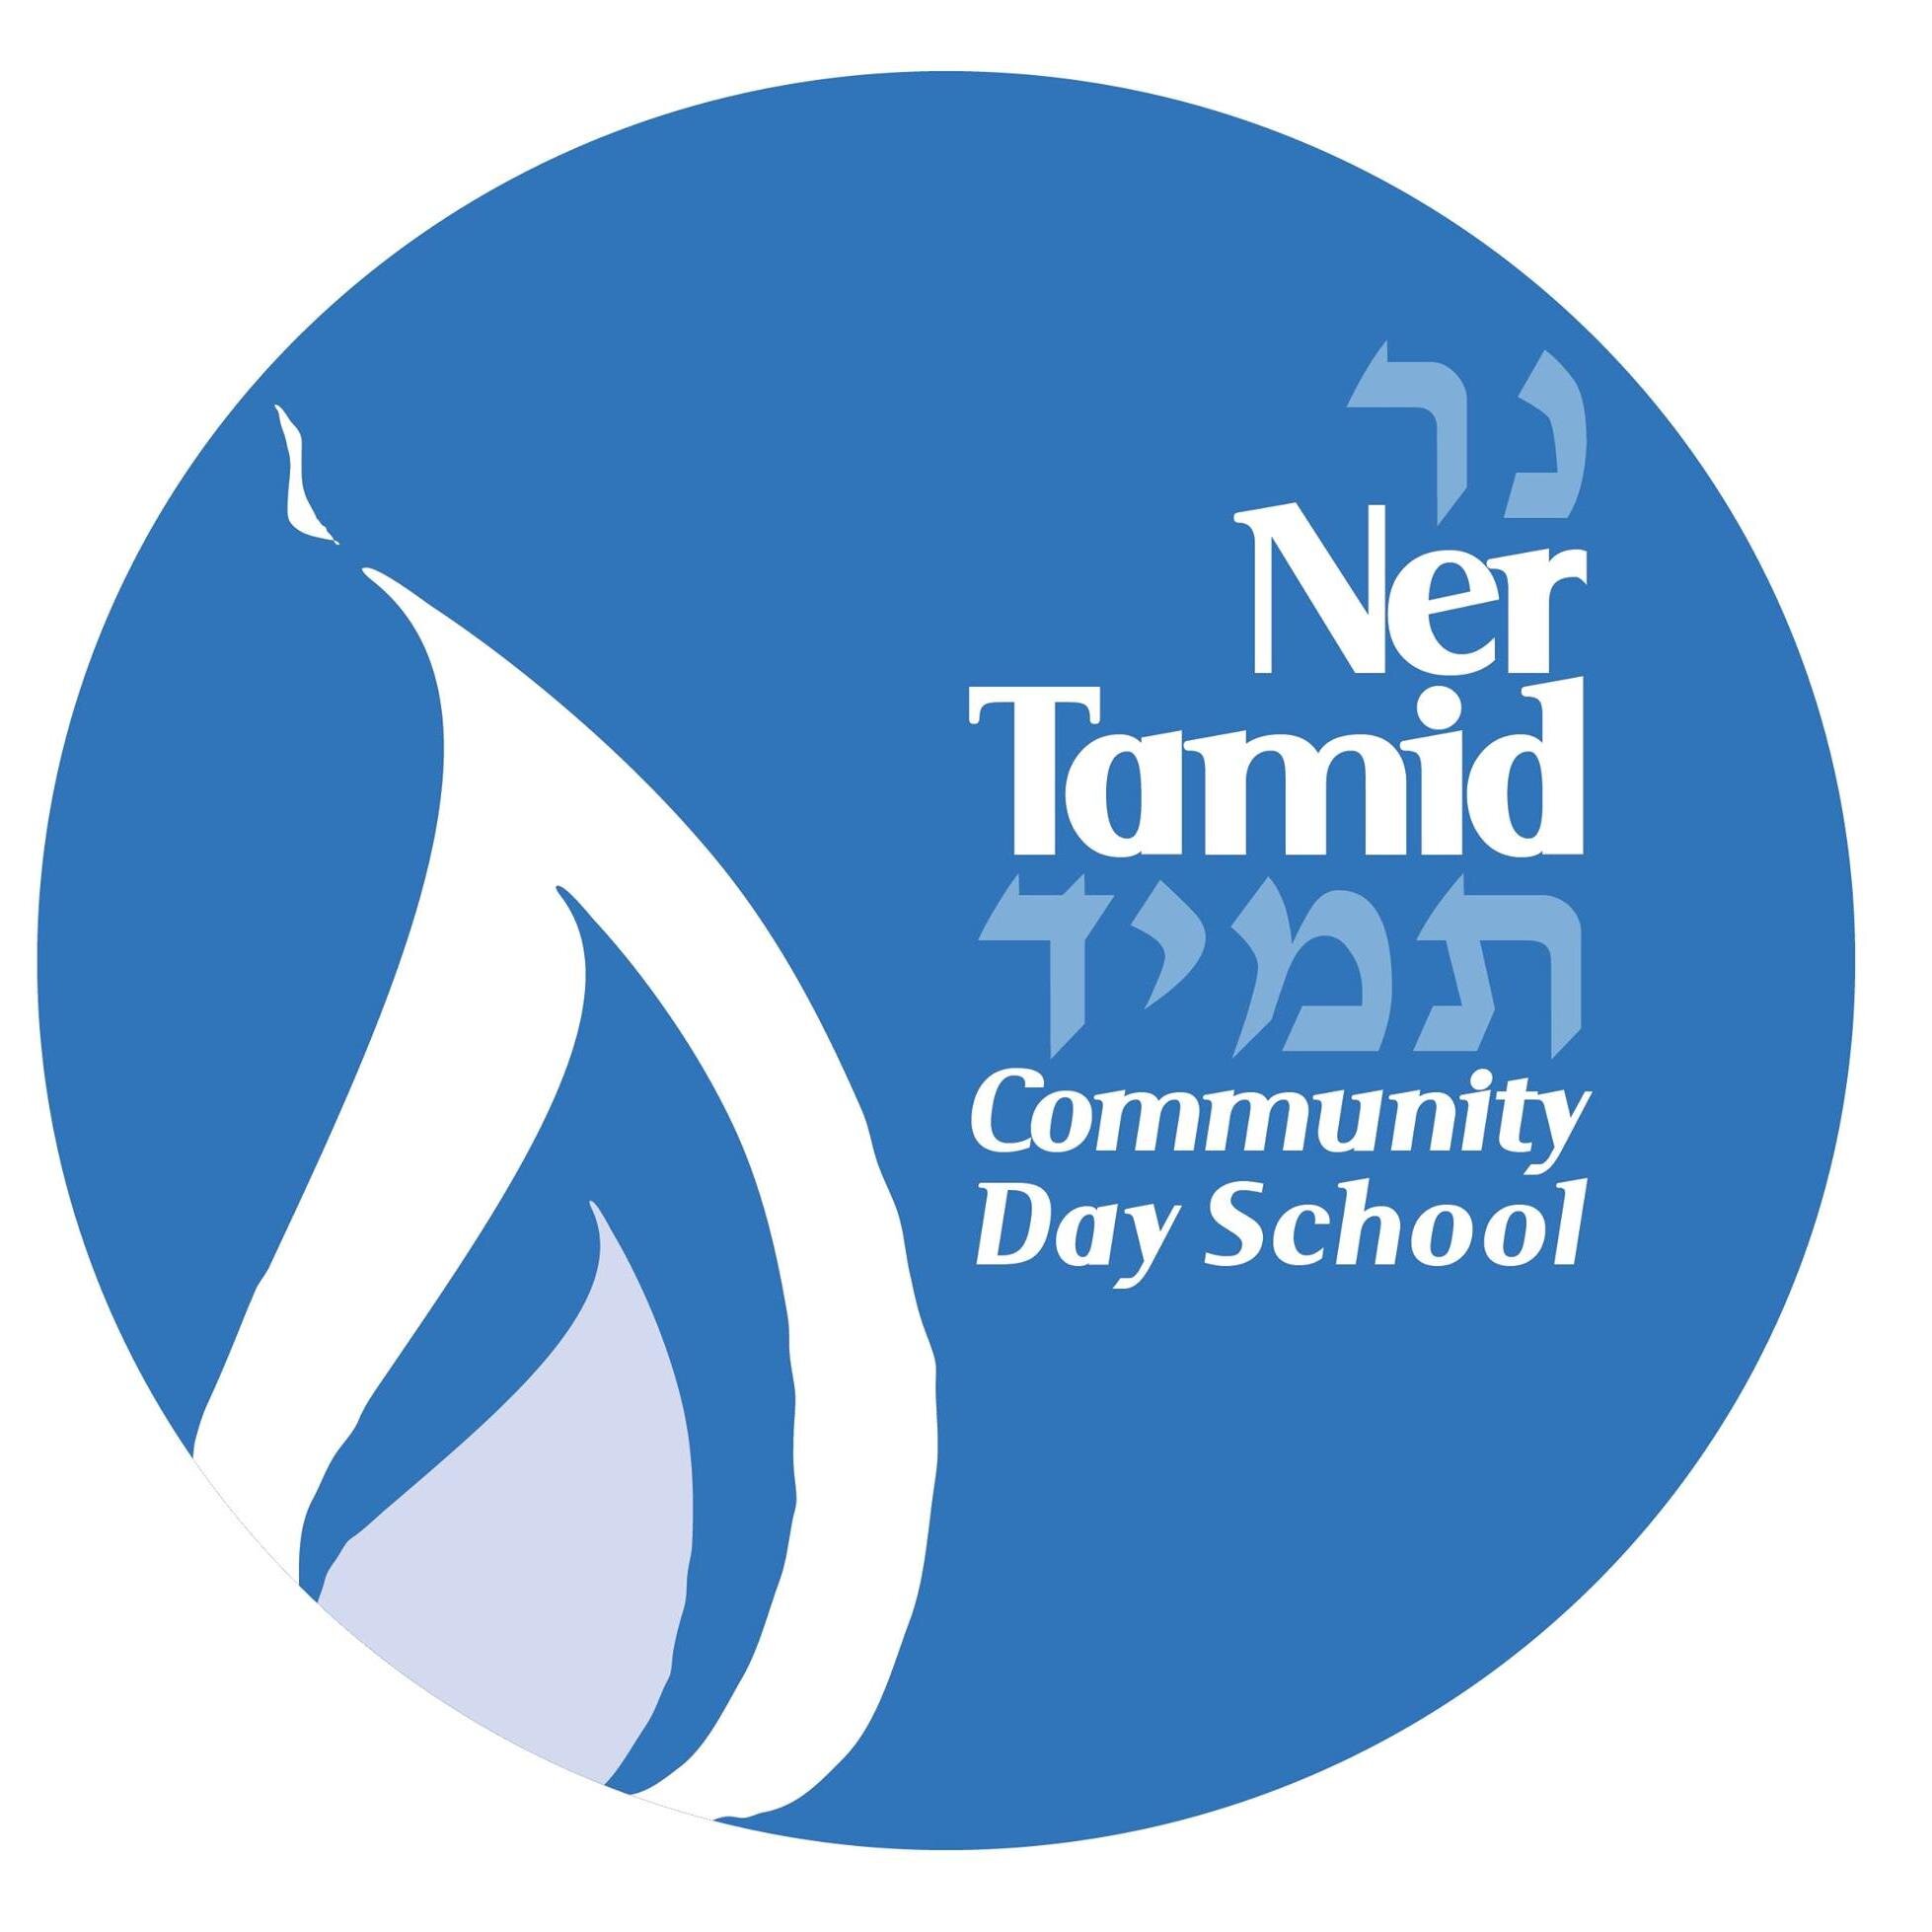 A new Jewish day school in Boston’s South Area committed to individualized learning & Jewish life. Founded by parents, teachers & friends of SASSDS/KSA.